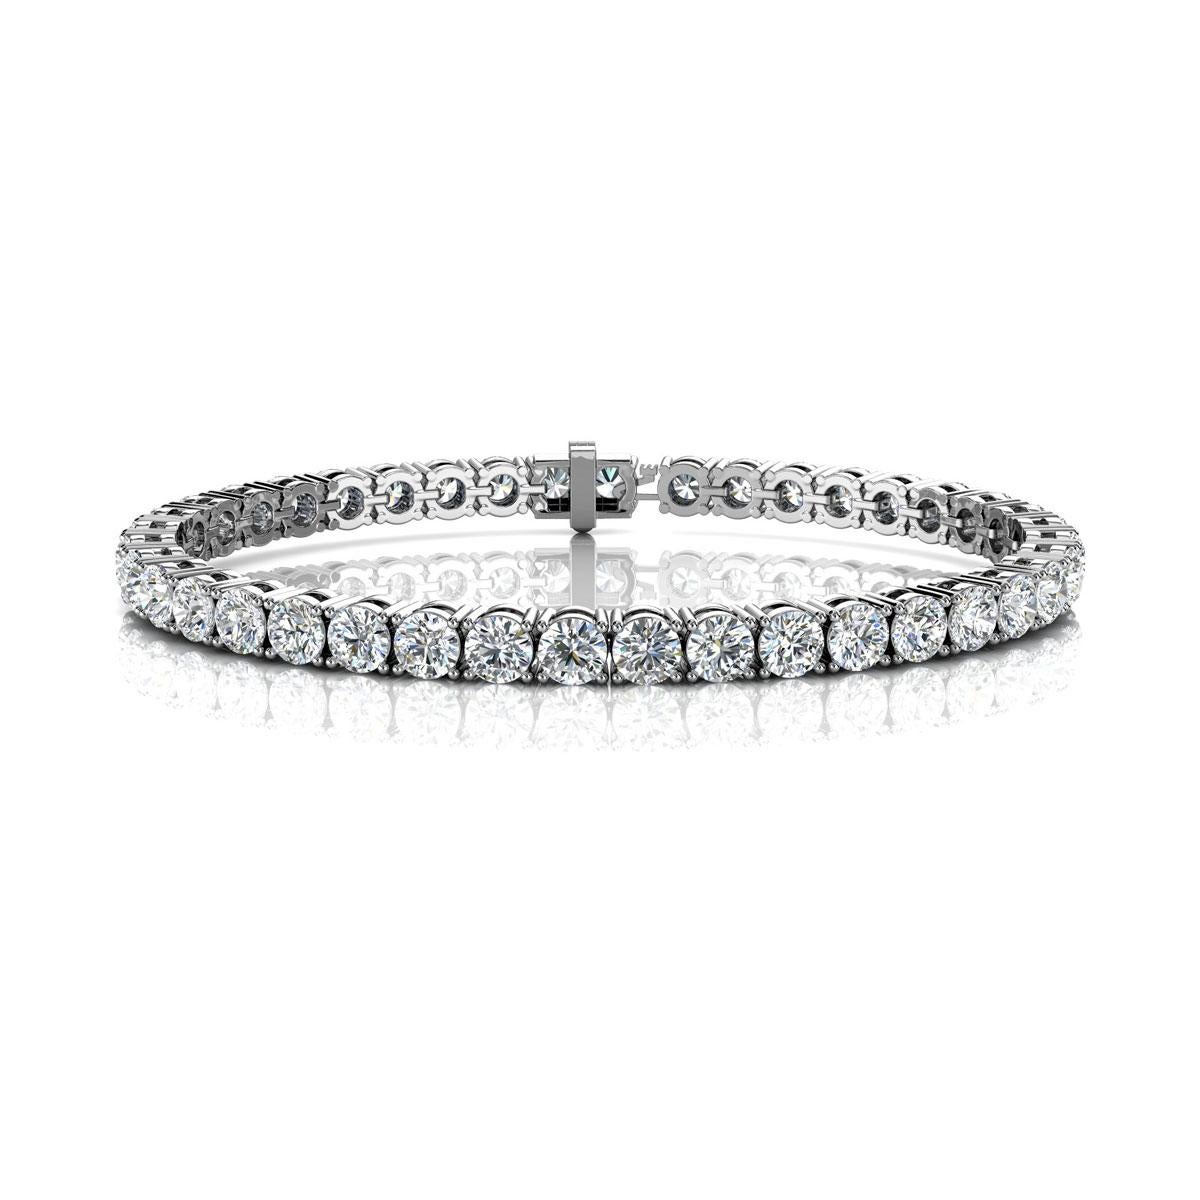 A timeless four prongs diamonds tennis bracelet. Experience the Difference!

Product details: 

Center Gemstone Type: NATURAL DIAMOND
Center Gemstone Color: WHITE
Center Gemstone Shape: ROUND
Center Diamond Carat Weight: 10
Metal: 18K White